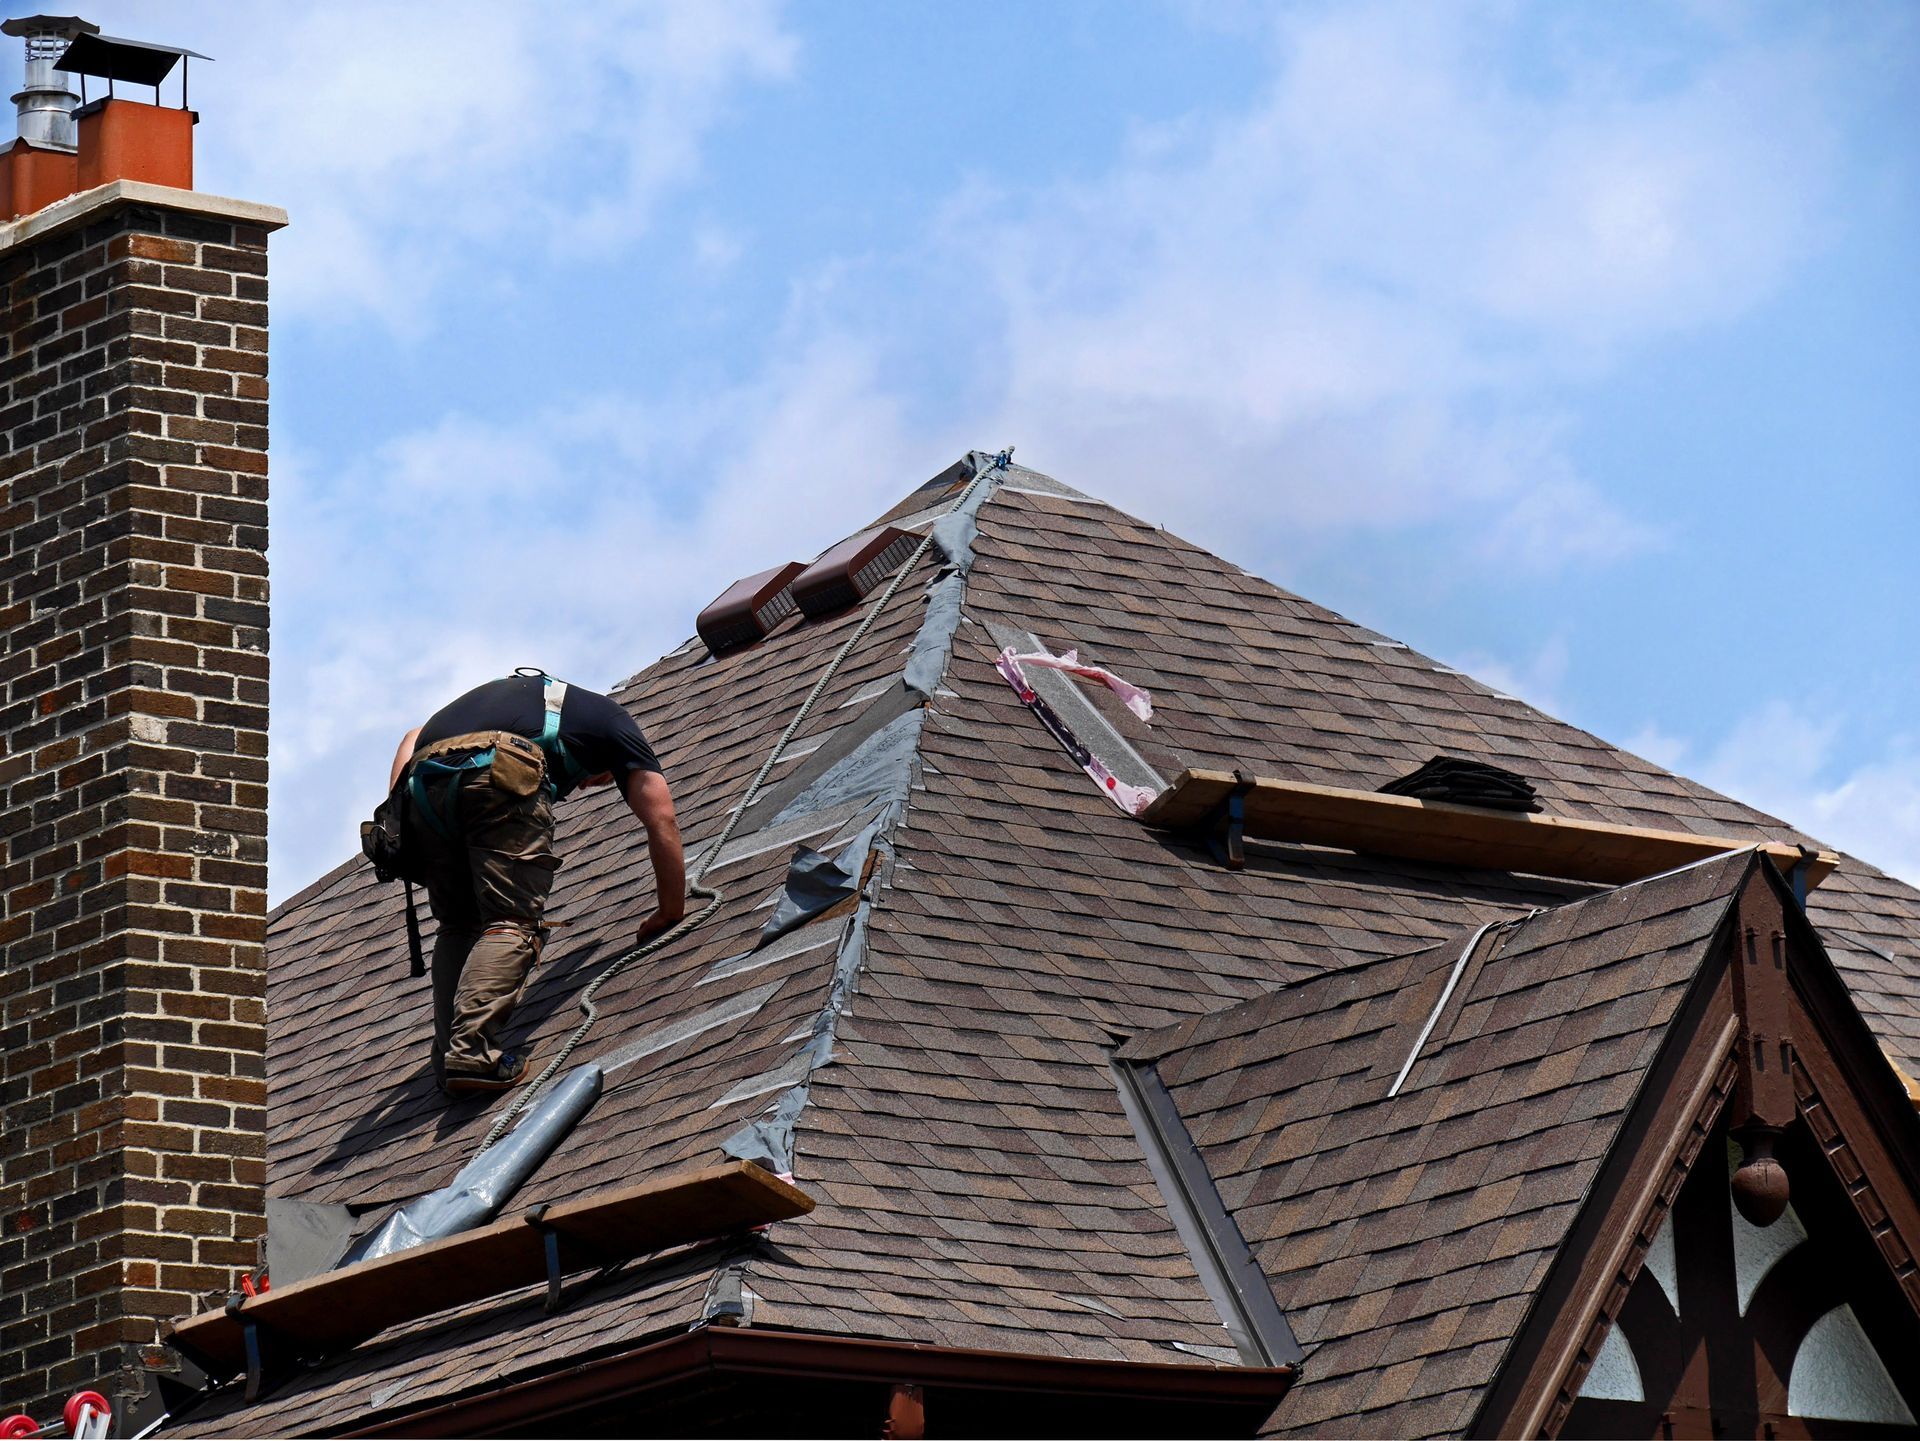 A skilled worker repairing a damaged roof, meticulously replacing shingles and reinforcing the structure to ensure durability and protection against the elements.